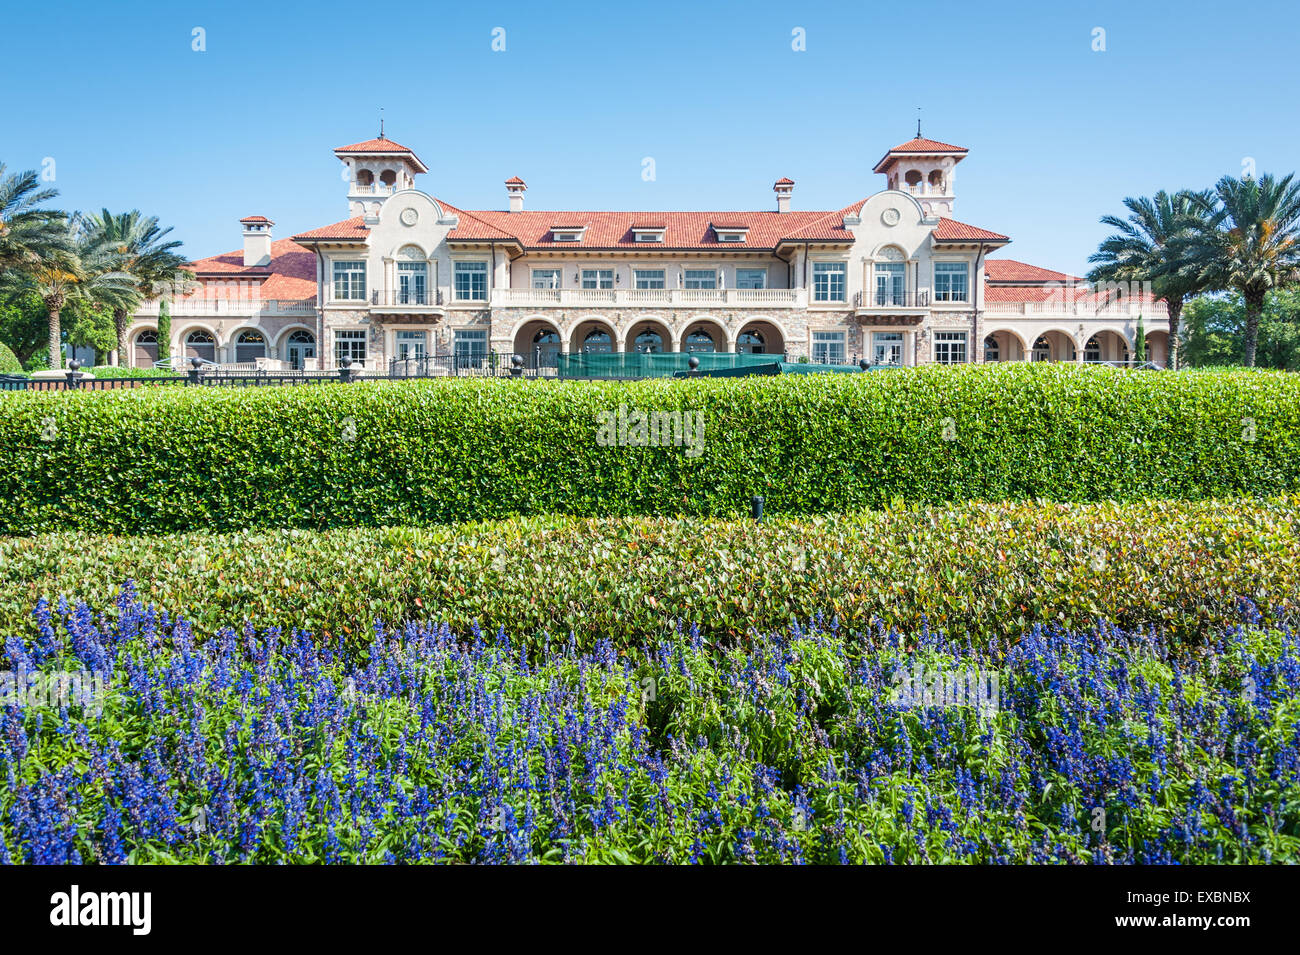 The exquisite clubhouse at TPC Sawgrass, home of professional golf's legendary The Players Championship in Ponte Vedra, Florida. Stock Photo